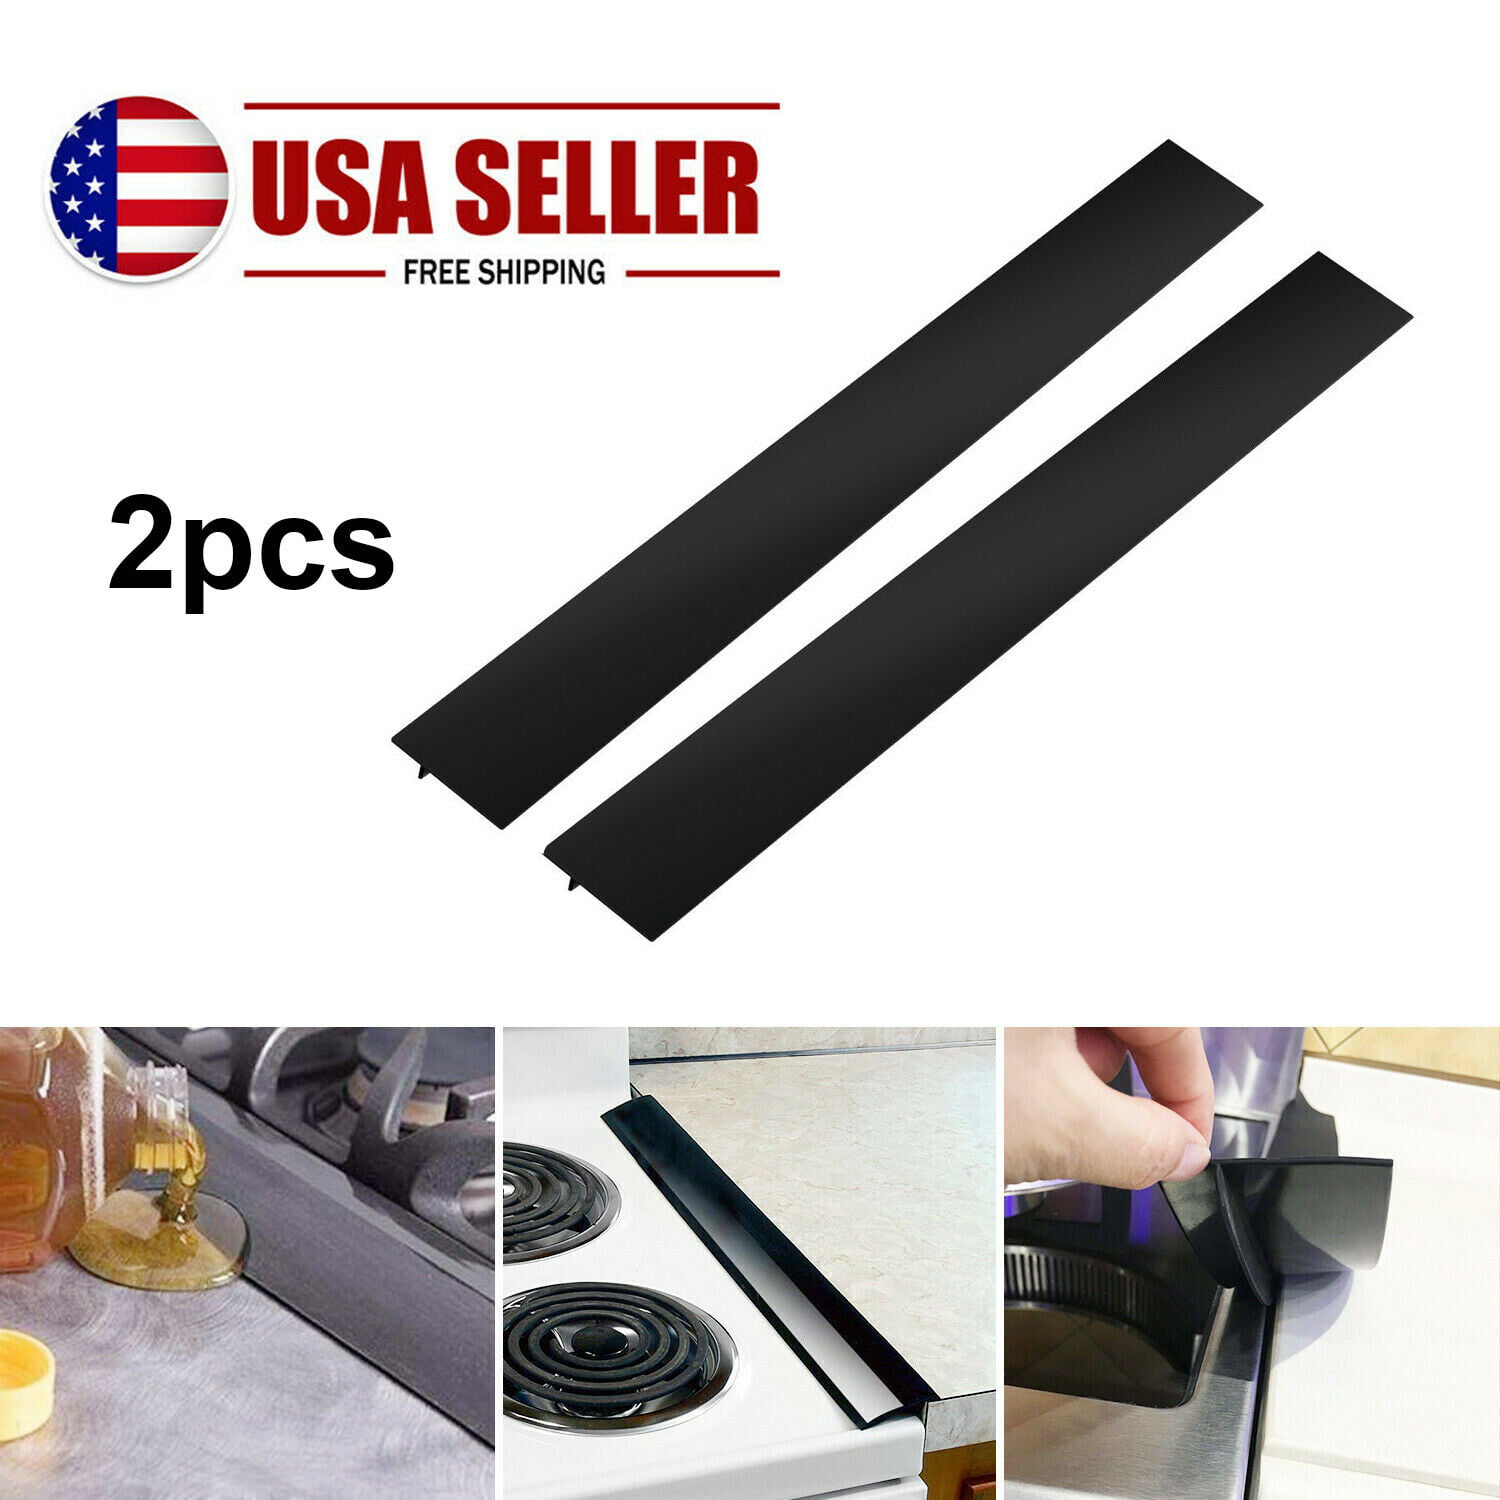 Flexible Silicone Kitchen Stove Counter Gap Cover Oven Guard Spill Seal Filler 